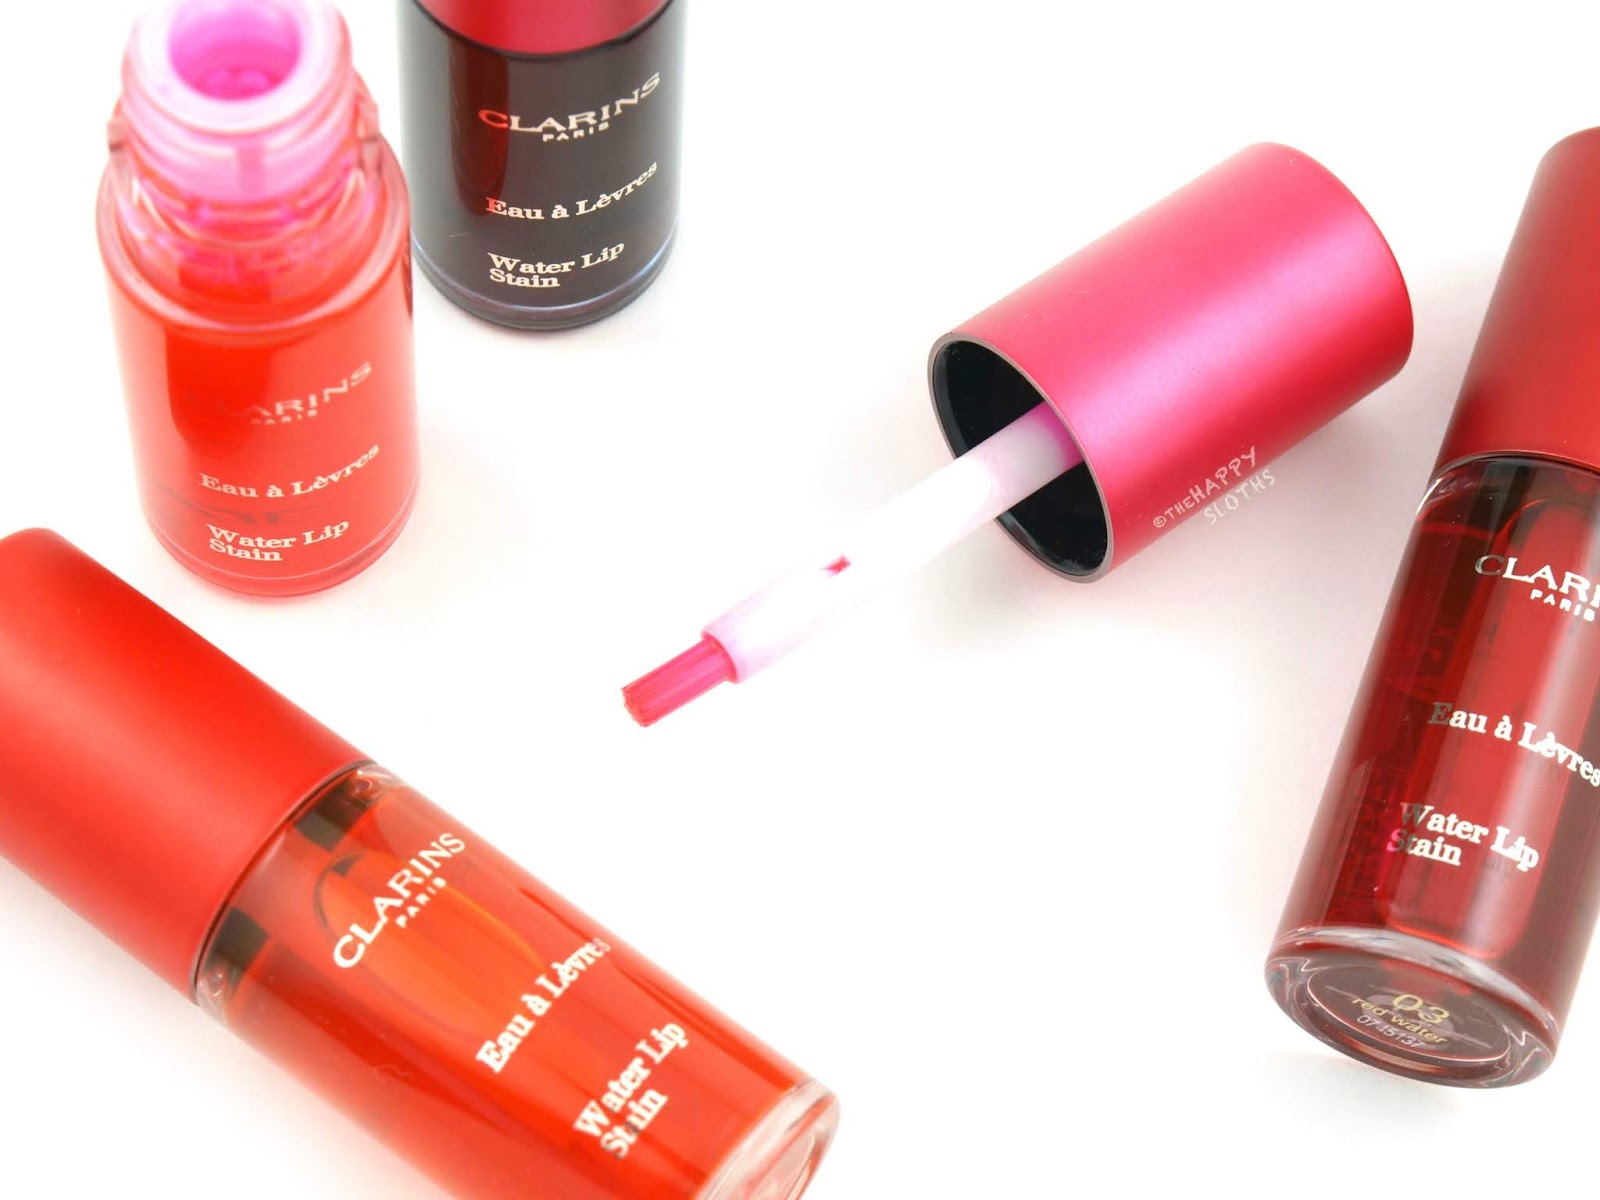 Clarins | Water Lip Stain: Review and Swatches